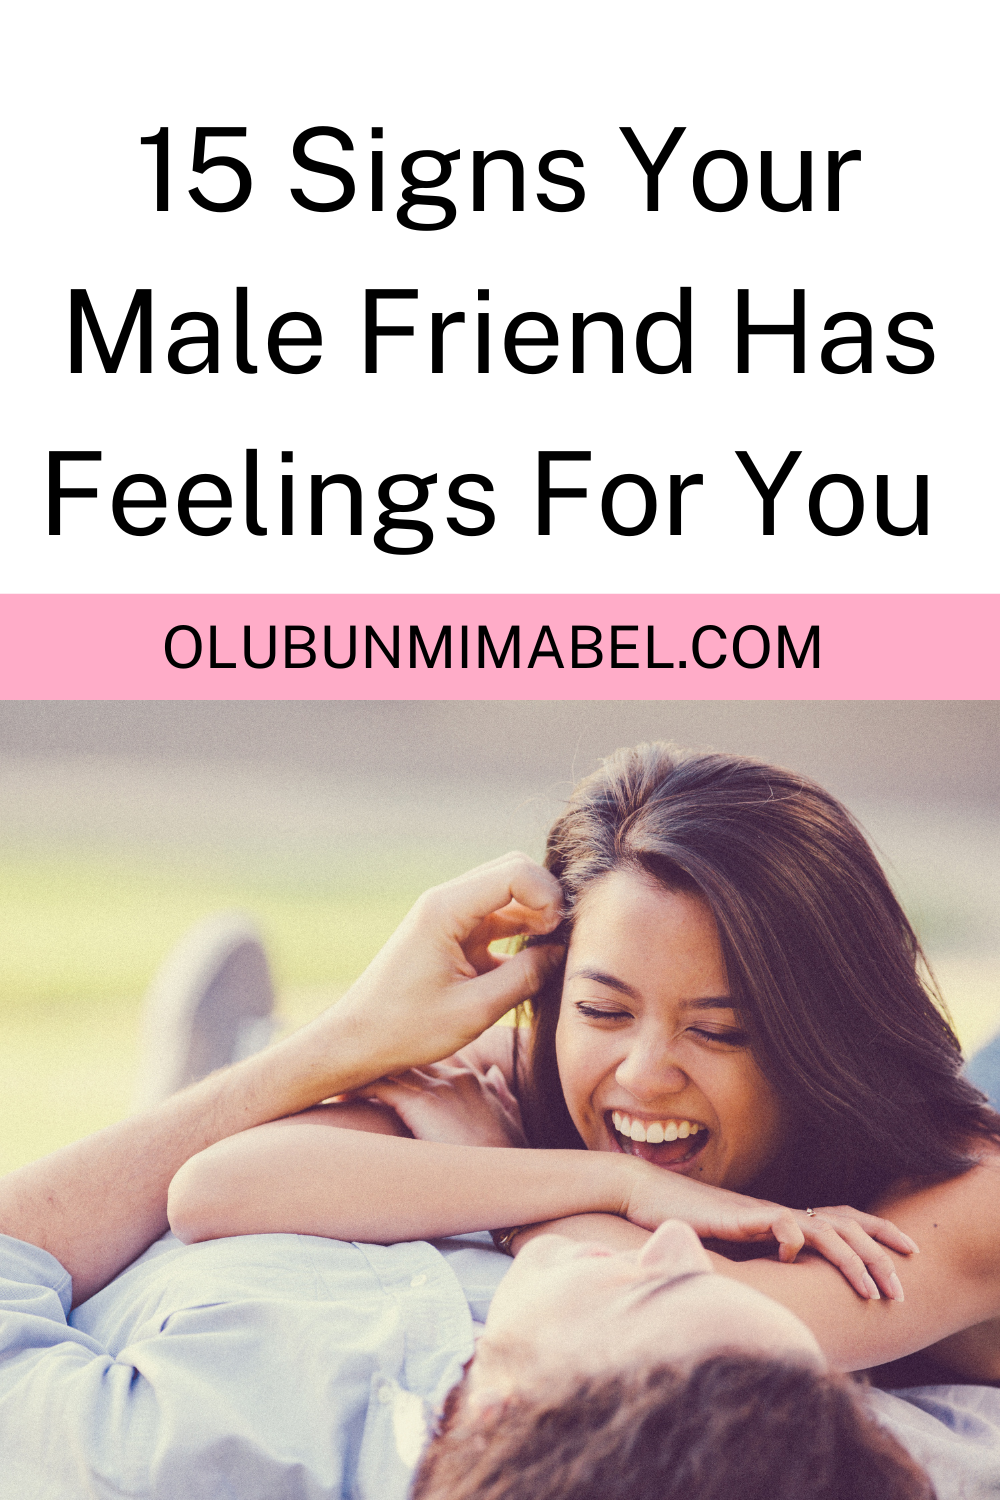 Signs Your Male Friend Has Feelings For You